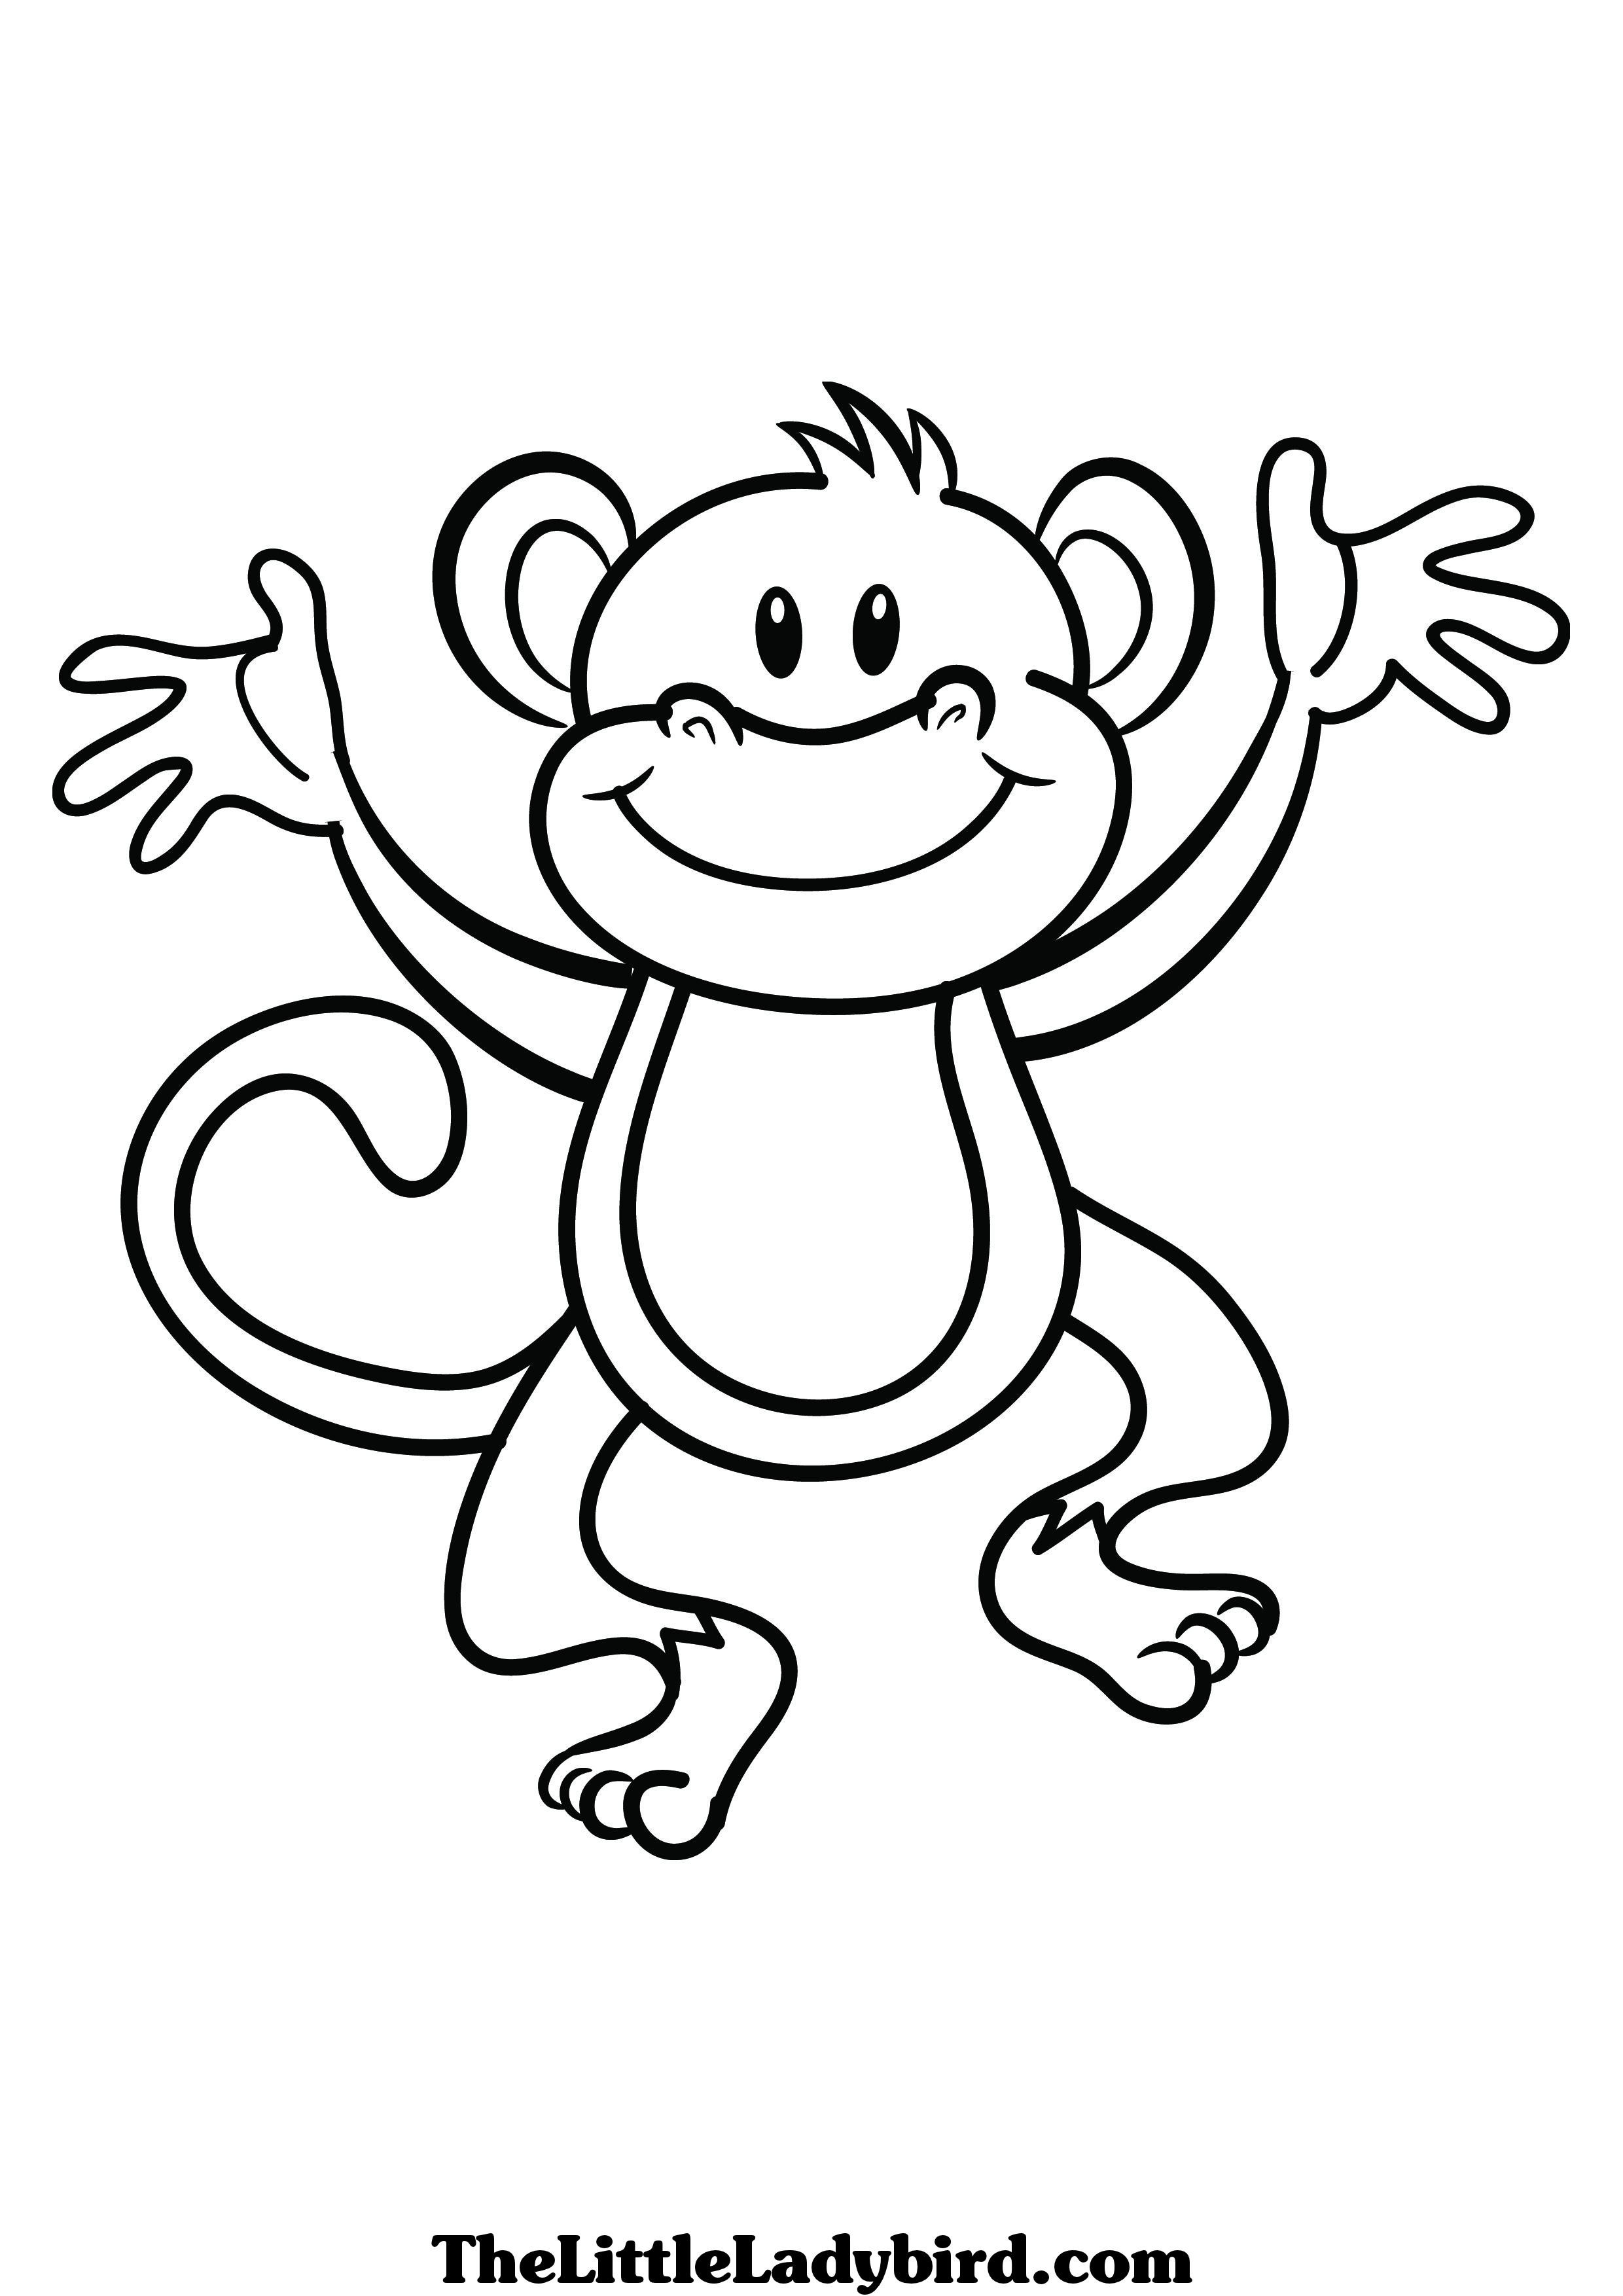 Free Preschool Coloring Sheets Of Monkeys
 monkey coloring pages Free